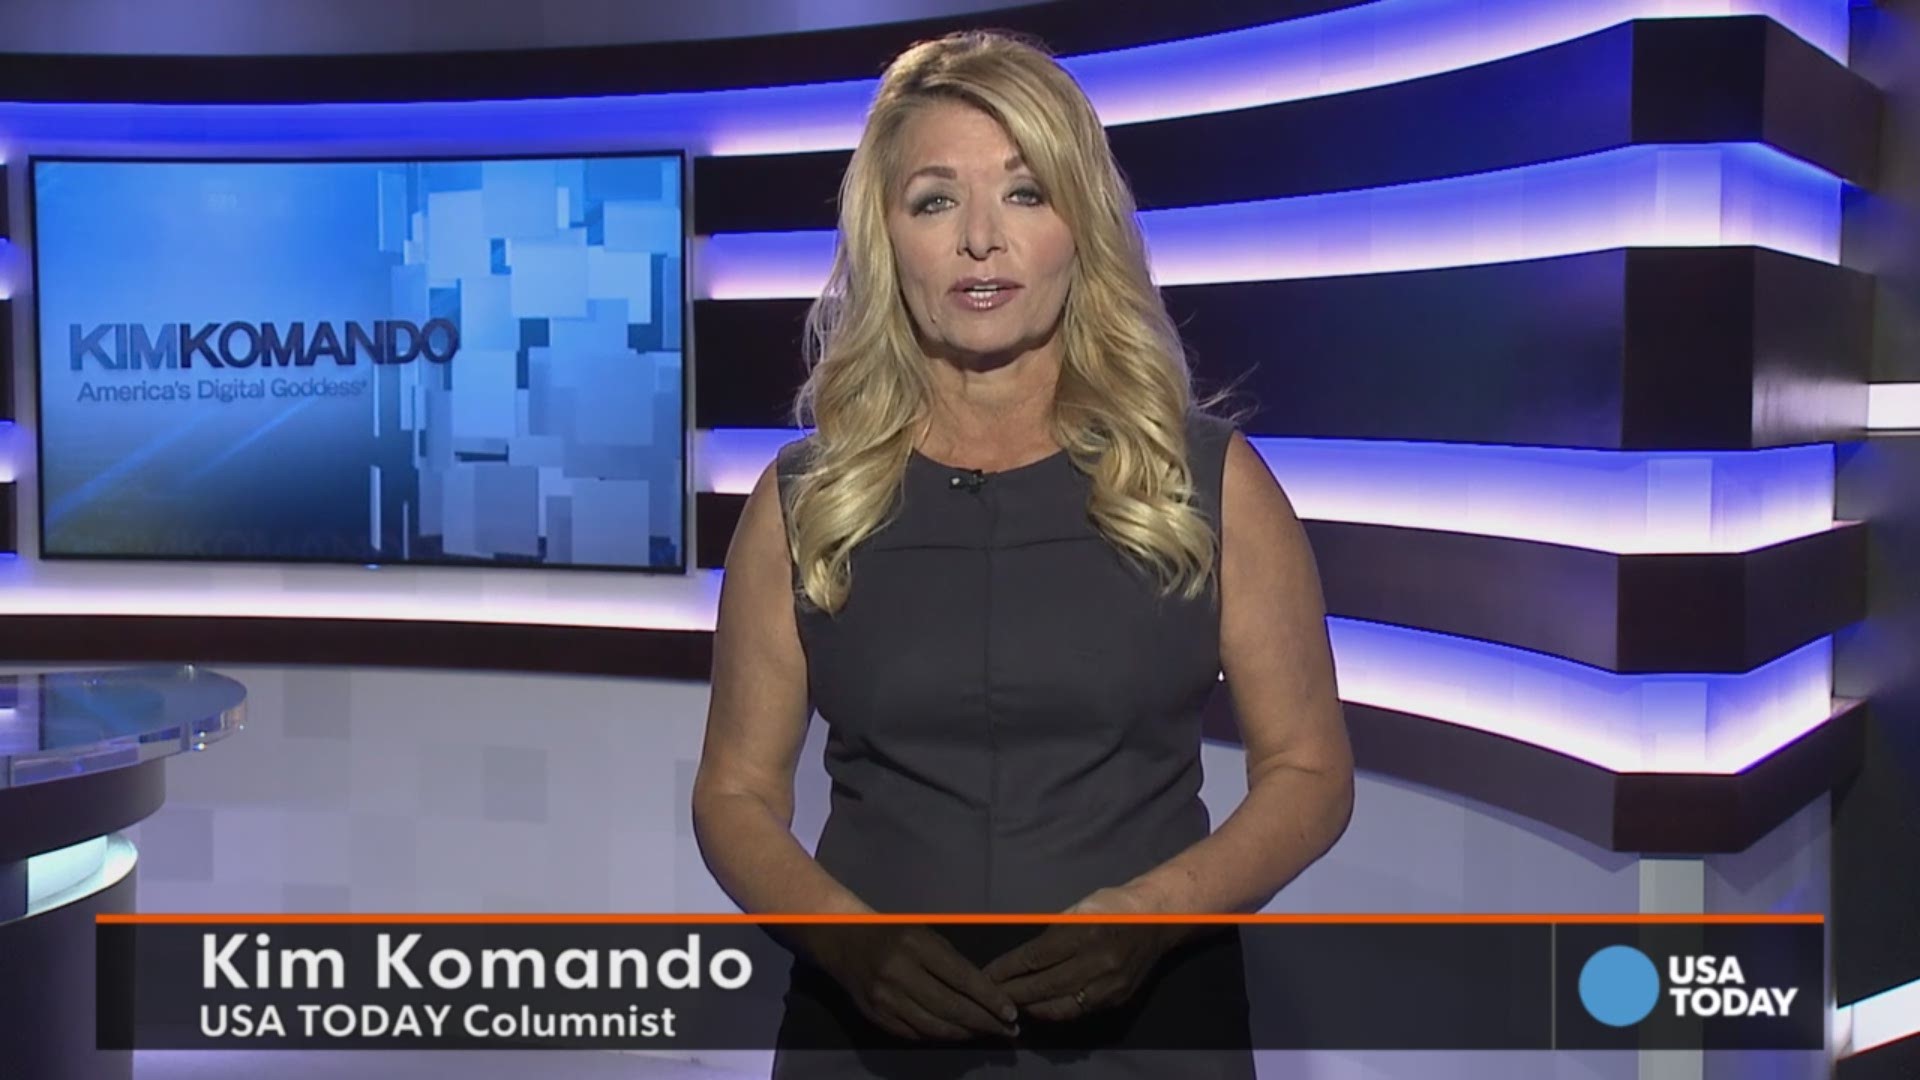 Tech columnist Kim Komando breaks down three scams to watch out for on Craigslist.